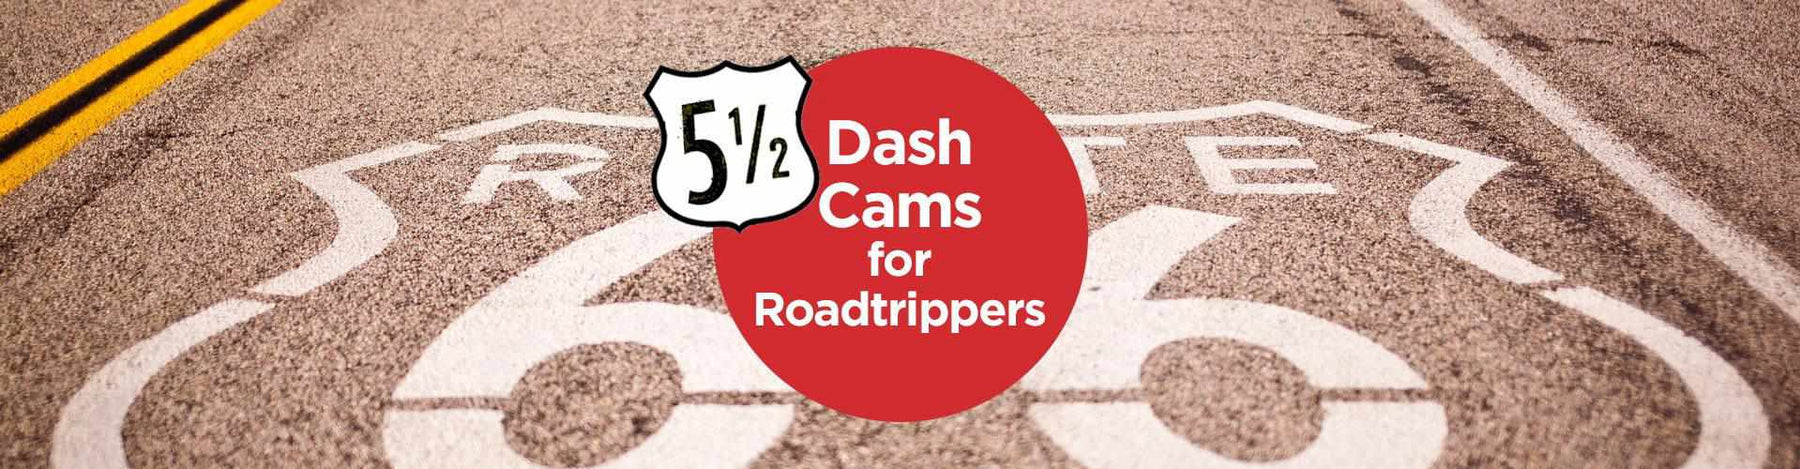 Five (and a half) Dash Cams for Roadtrippers -  - BlackboxMyCar Canada